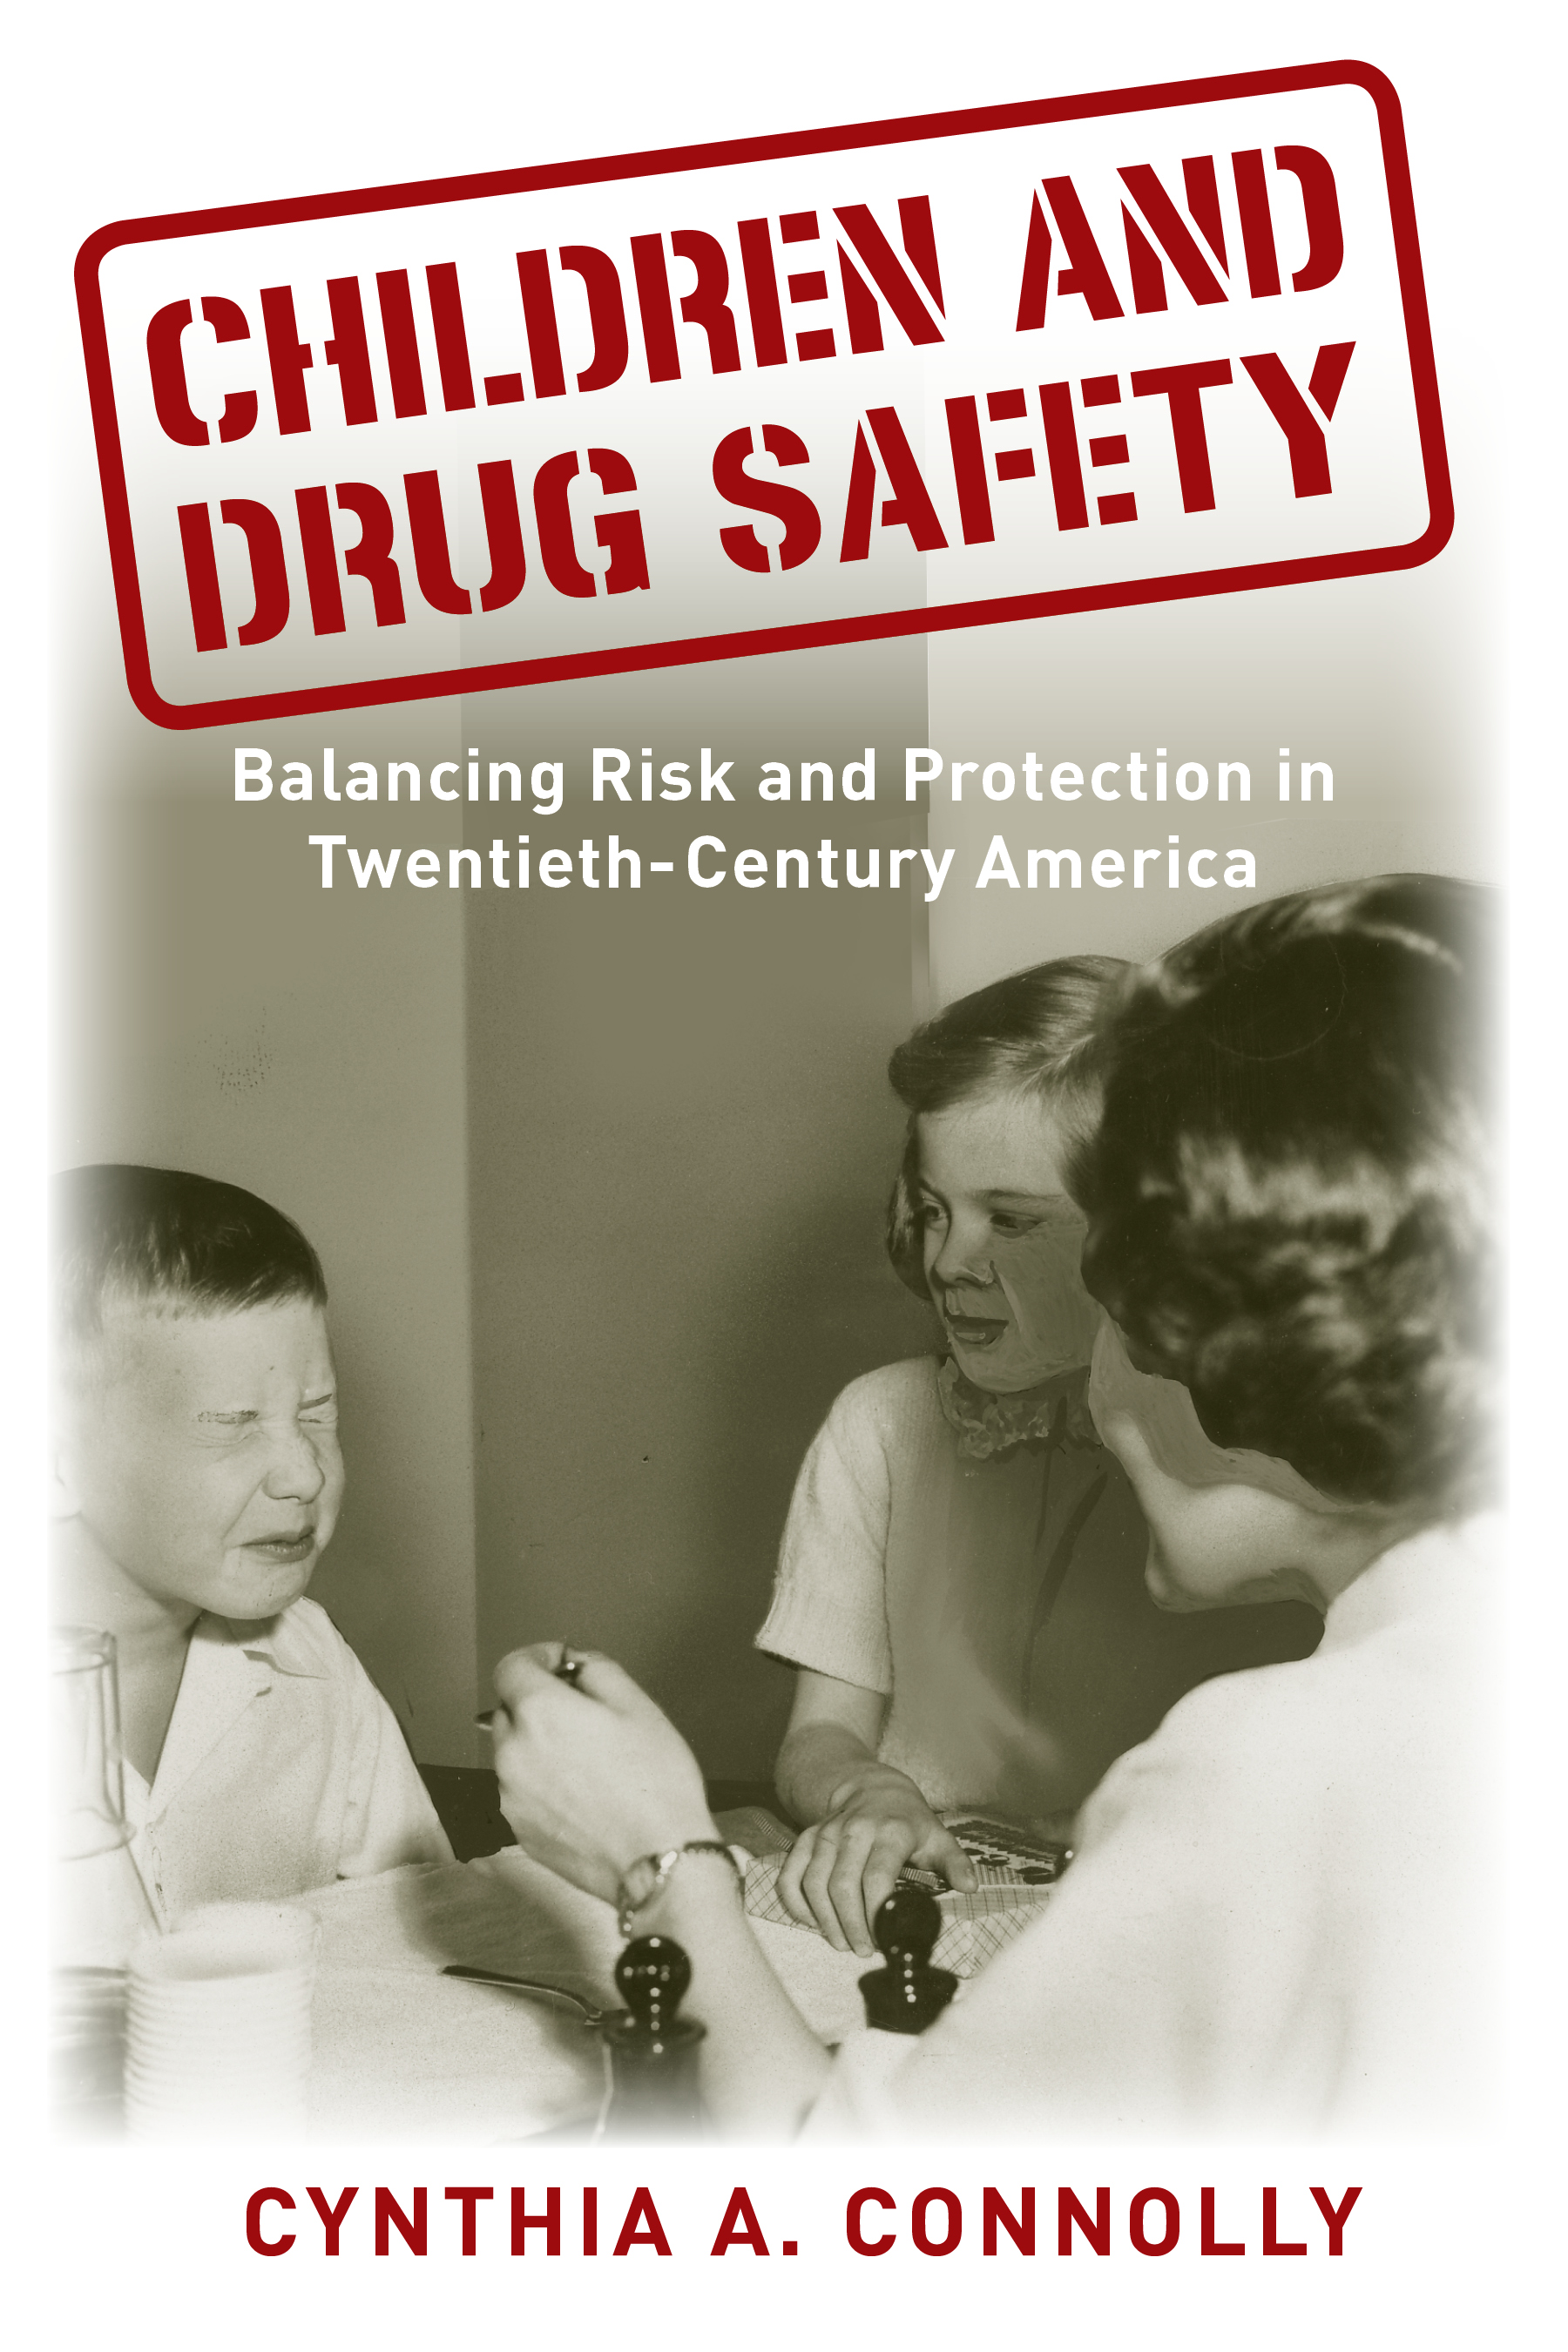 Cover of Cynthia Connolly’s new book “Children and Drug Safety: Balancing Risk and Protection in Twentieth Century America” published in April 2018 by Rutgers University Press.  